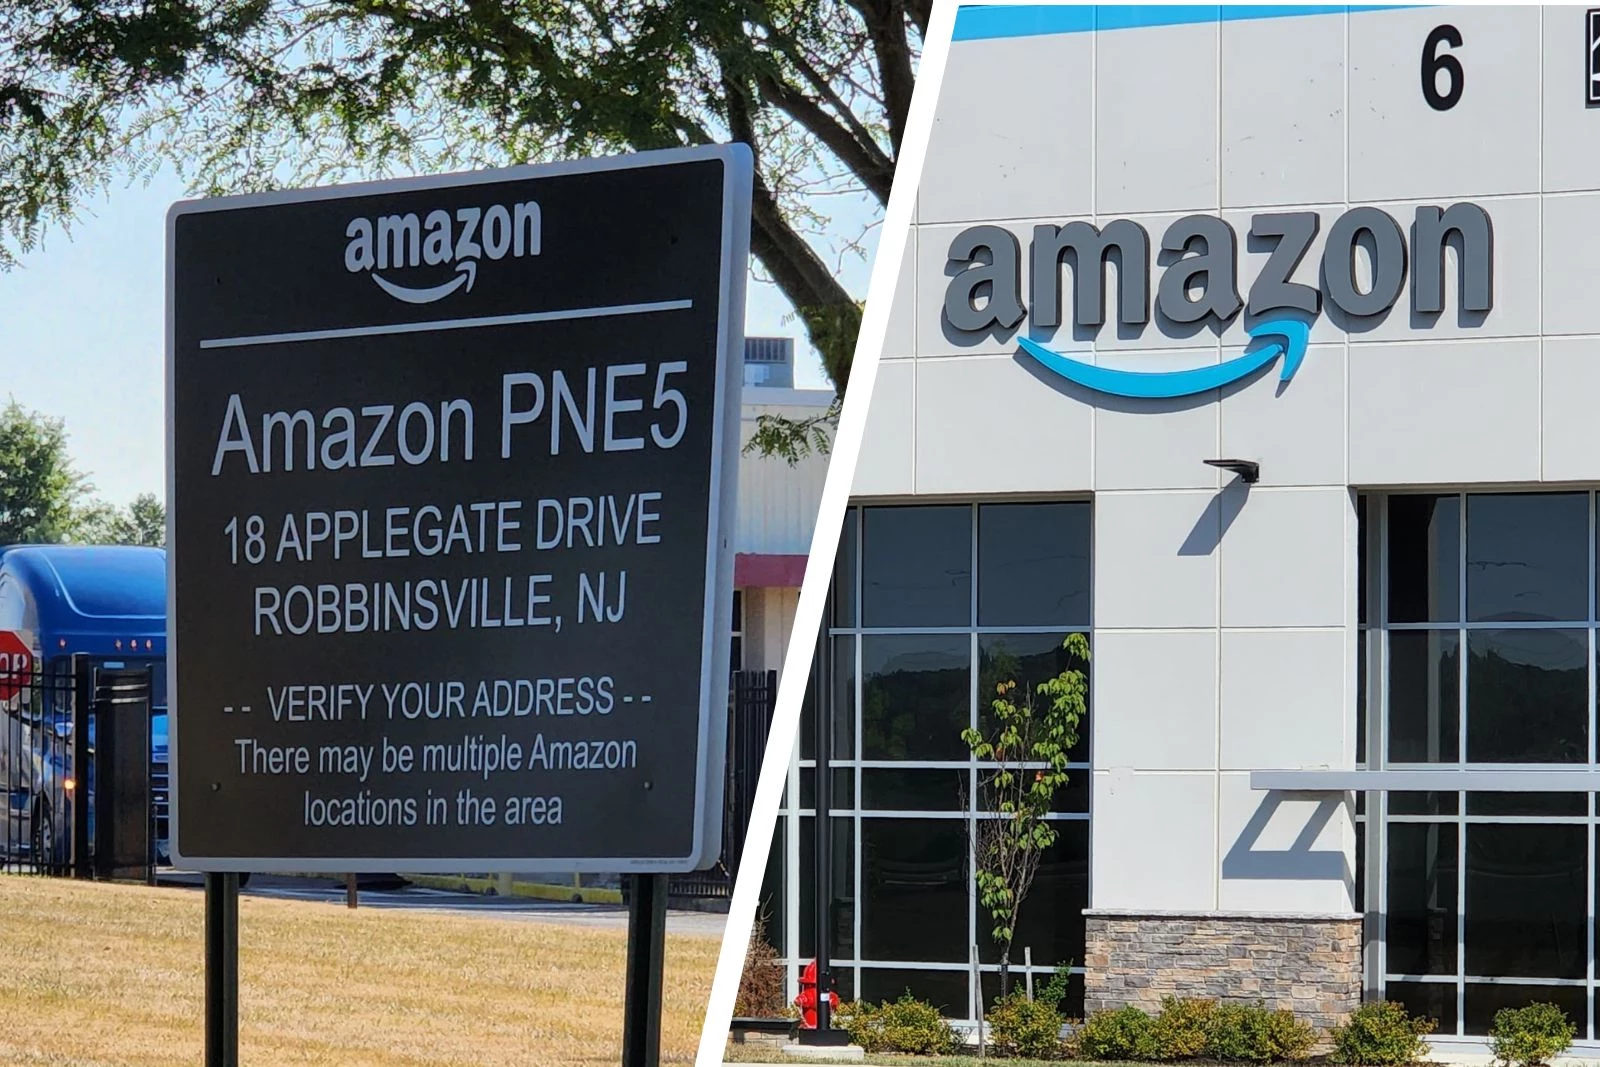 Two more die in NJ Amazon facilities within two weeks